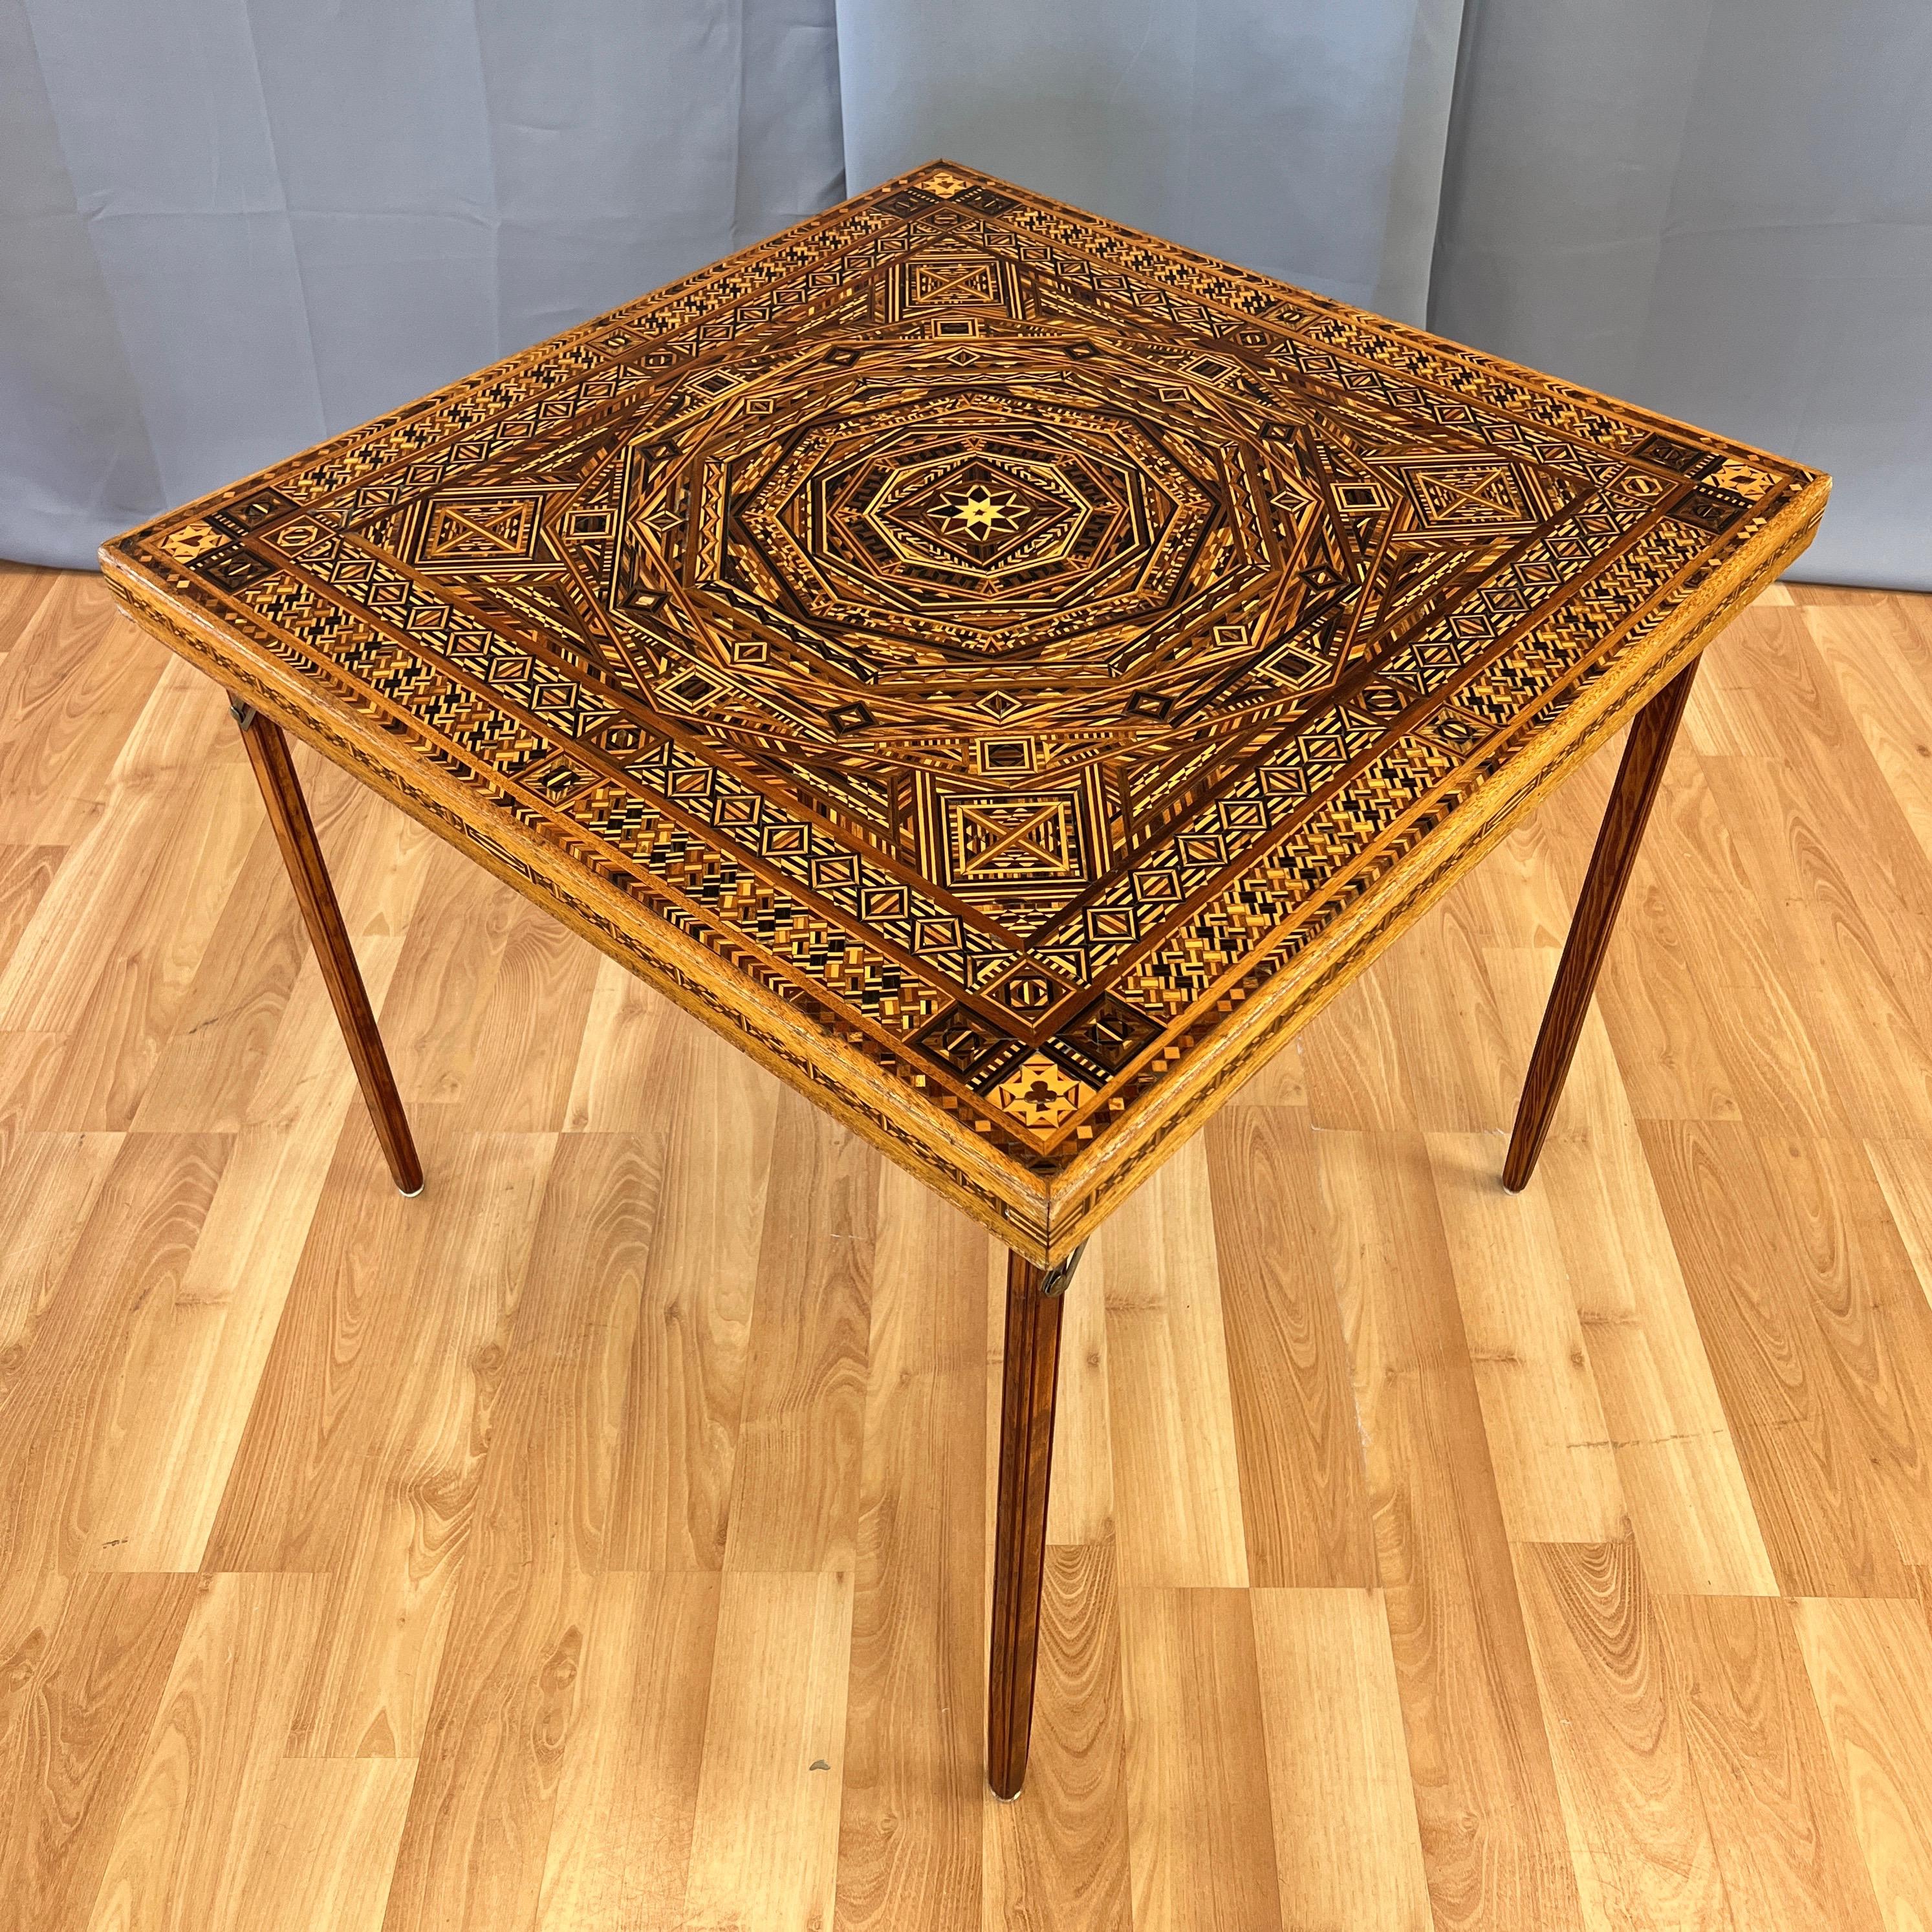 Syrian-Style Exceptionally Intricate Wood Marquetry Folding Card Table, 1930s For Sale 6